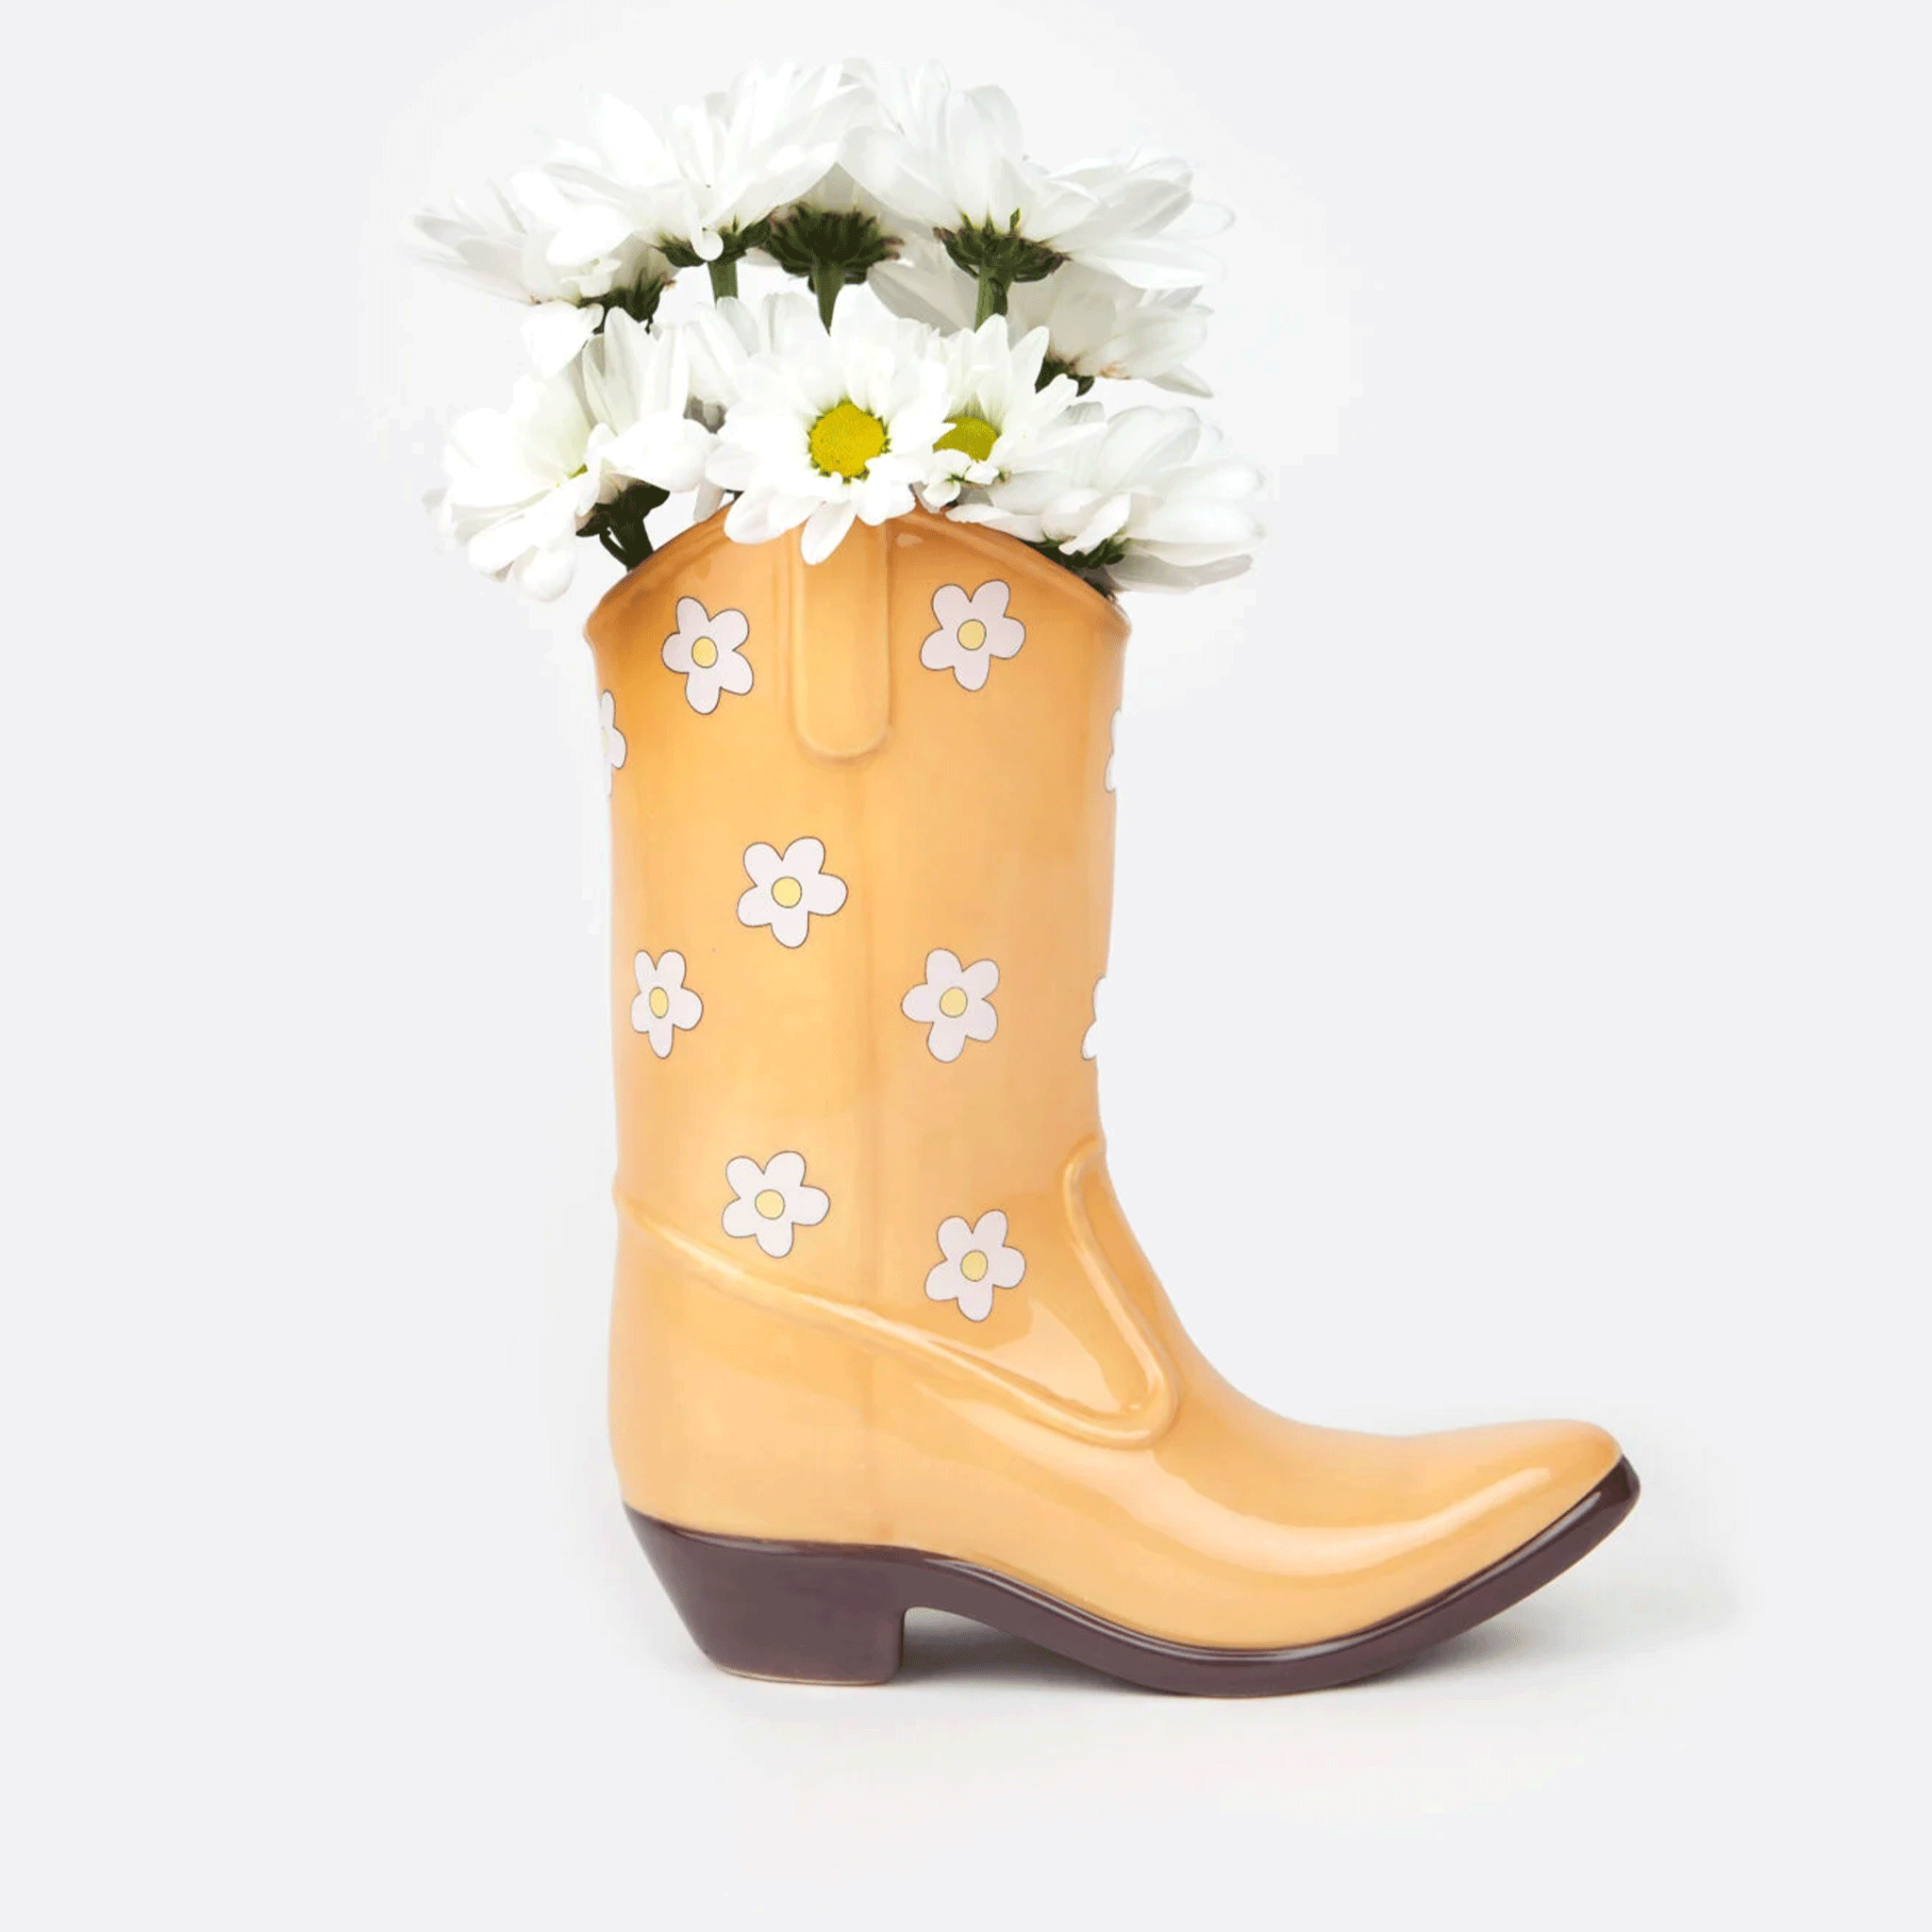 On a white background is a yellow cowboy boot shaped vase with white and yellow daisy print all over. Flowers not included with purchase. 